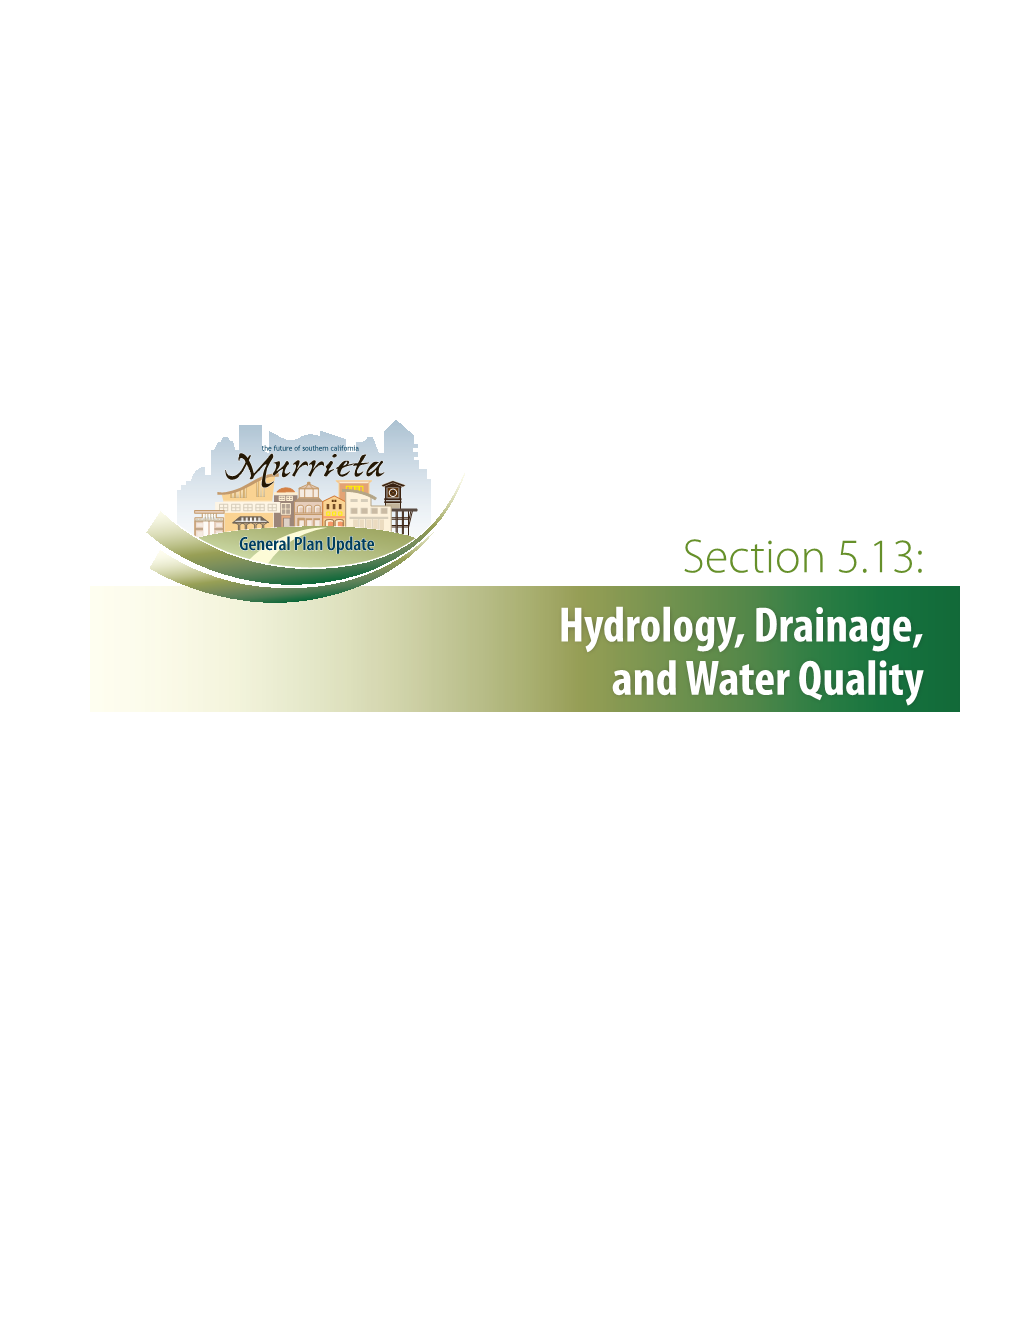 Hydrology, Drainage, and Water Quality